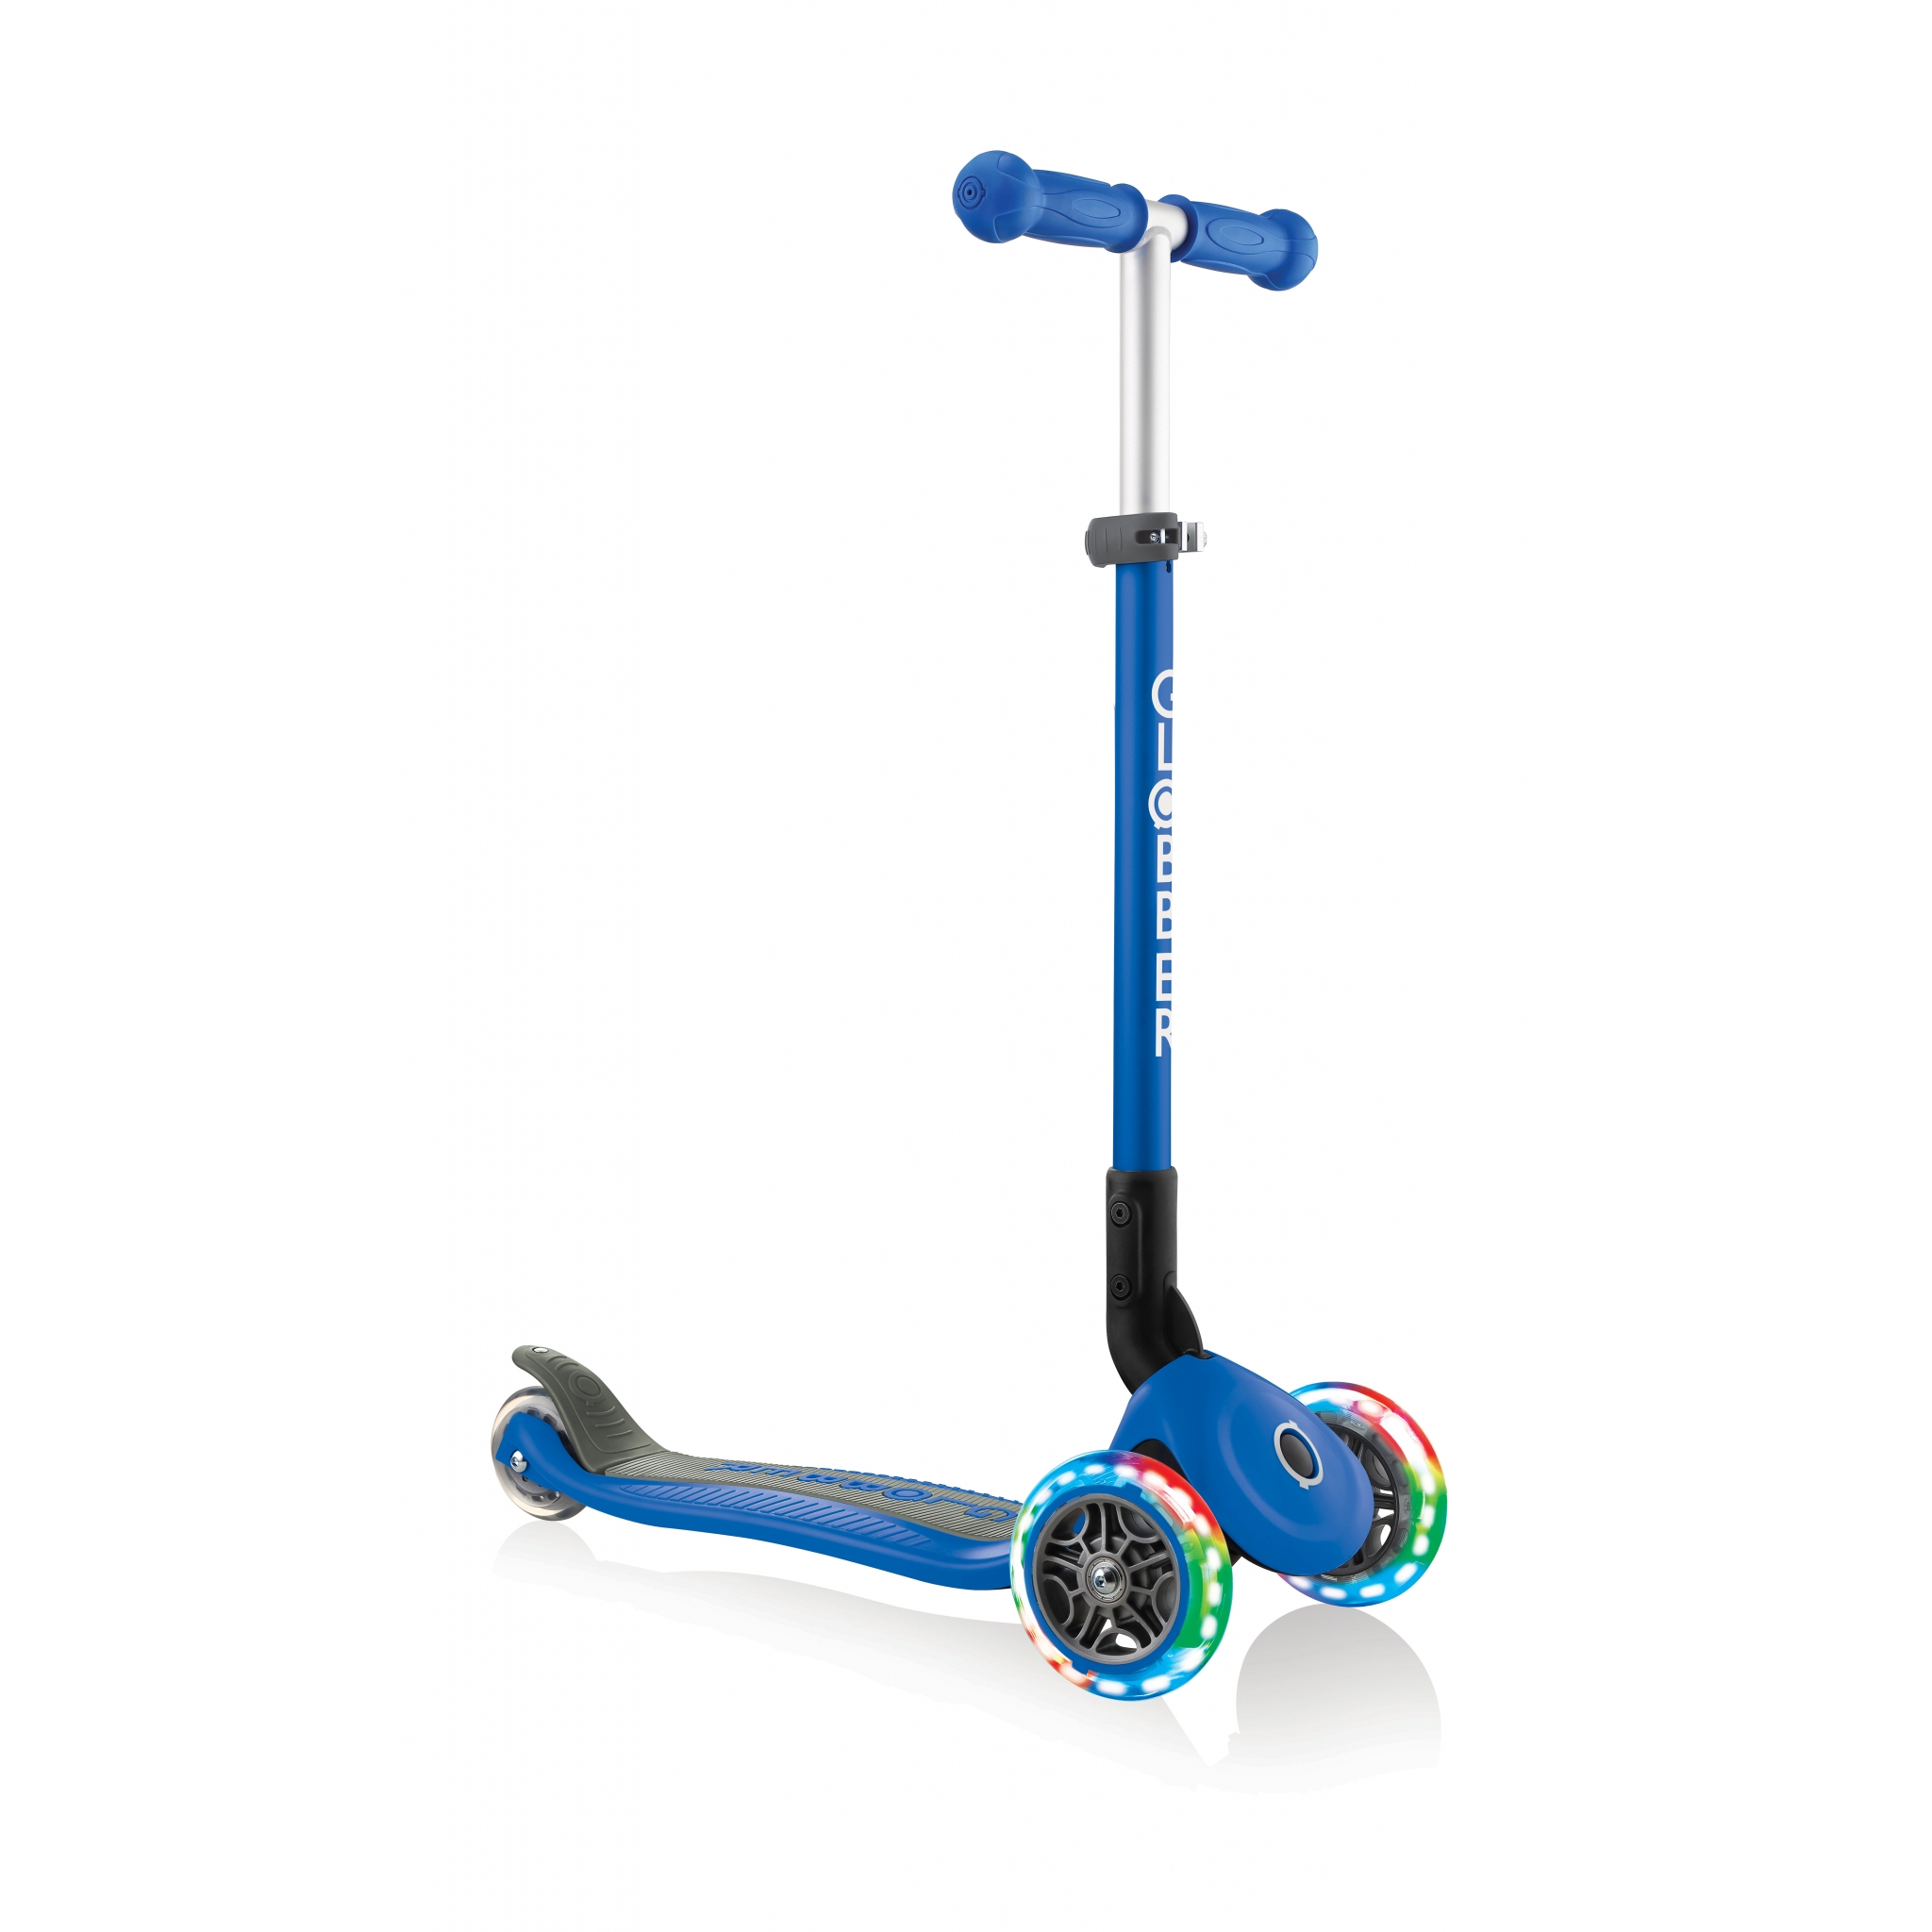 PRIMO-FOLDABLE-LIGHTS-3-wheel-foldable-scooter-light-up-scooter-for-kids-navy-blue 4